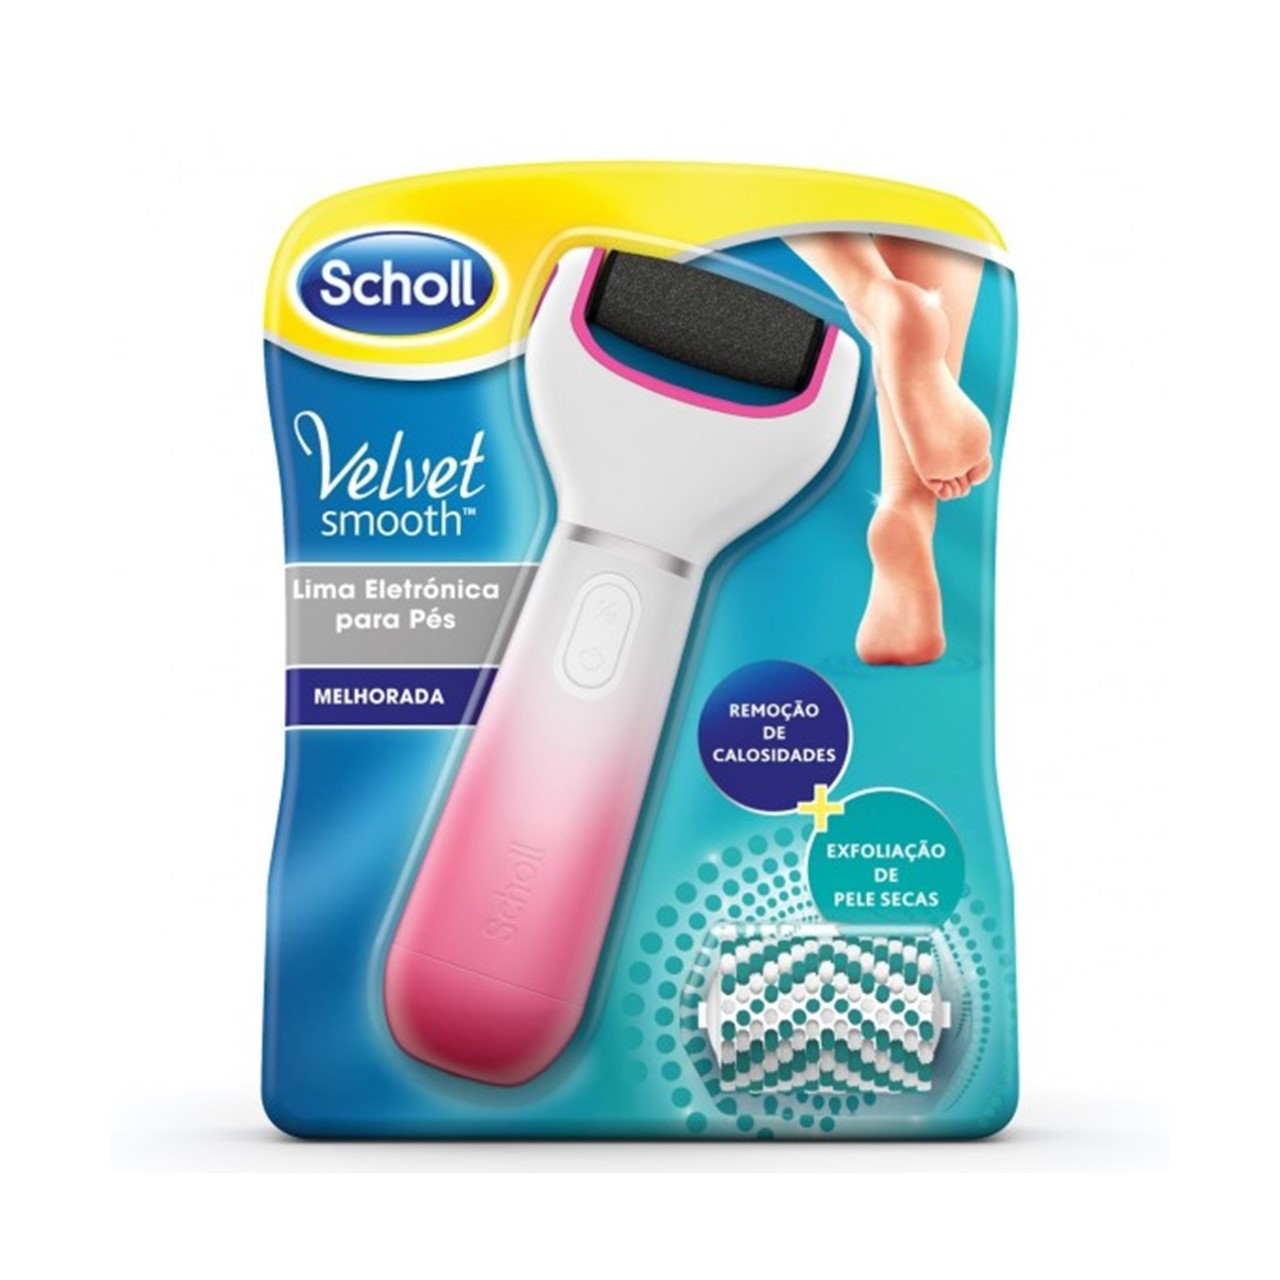  Dr. Scholl Velvet Smooth Diamond Electric Feet File with  Diamond Crystals 1 Item